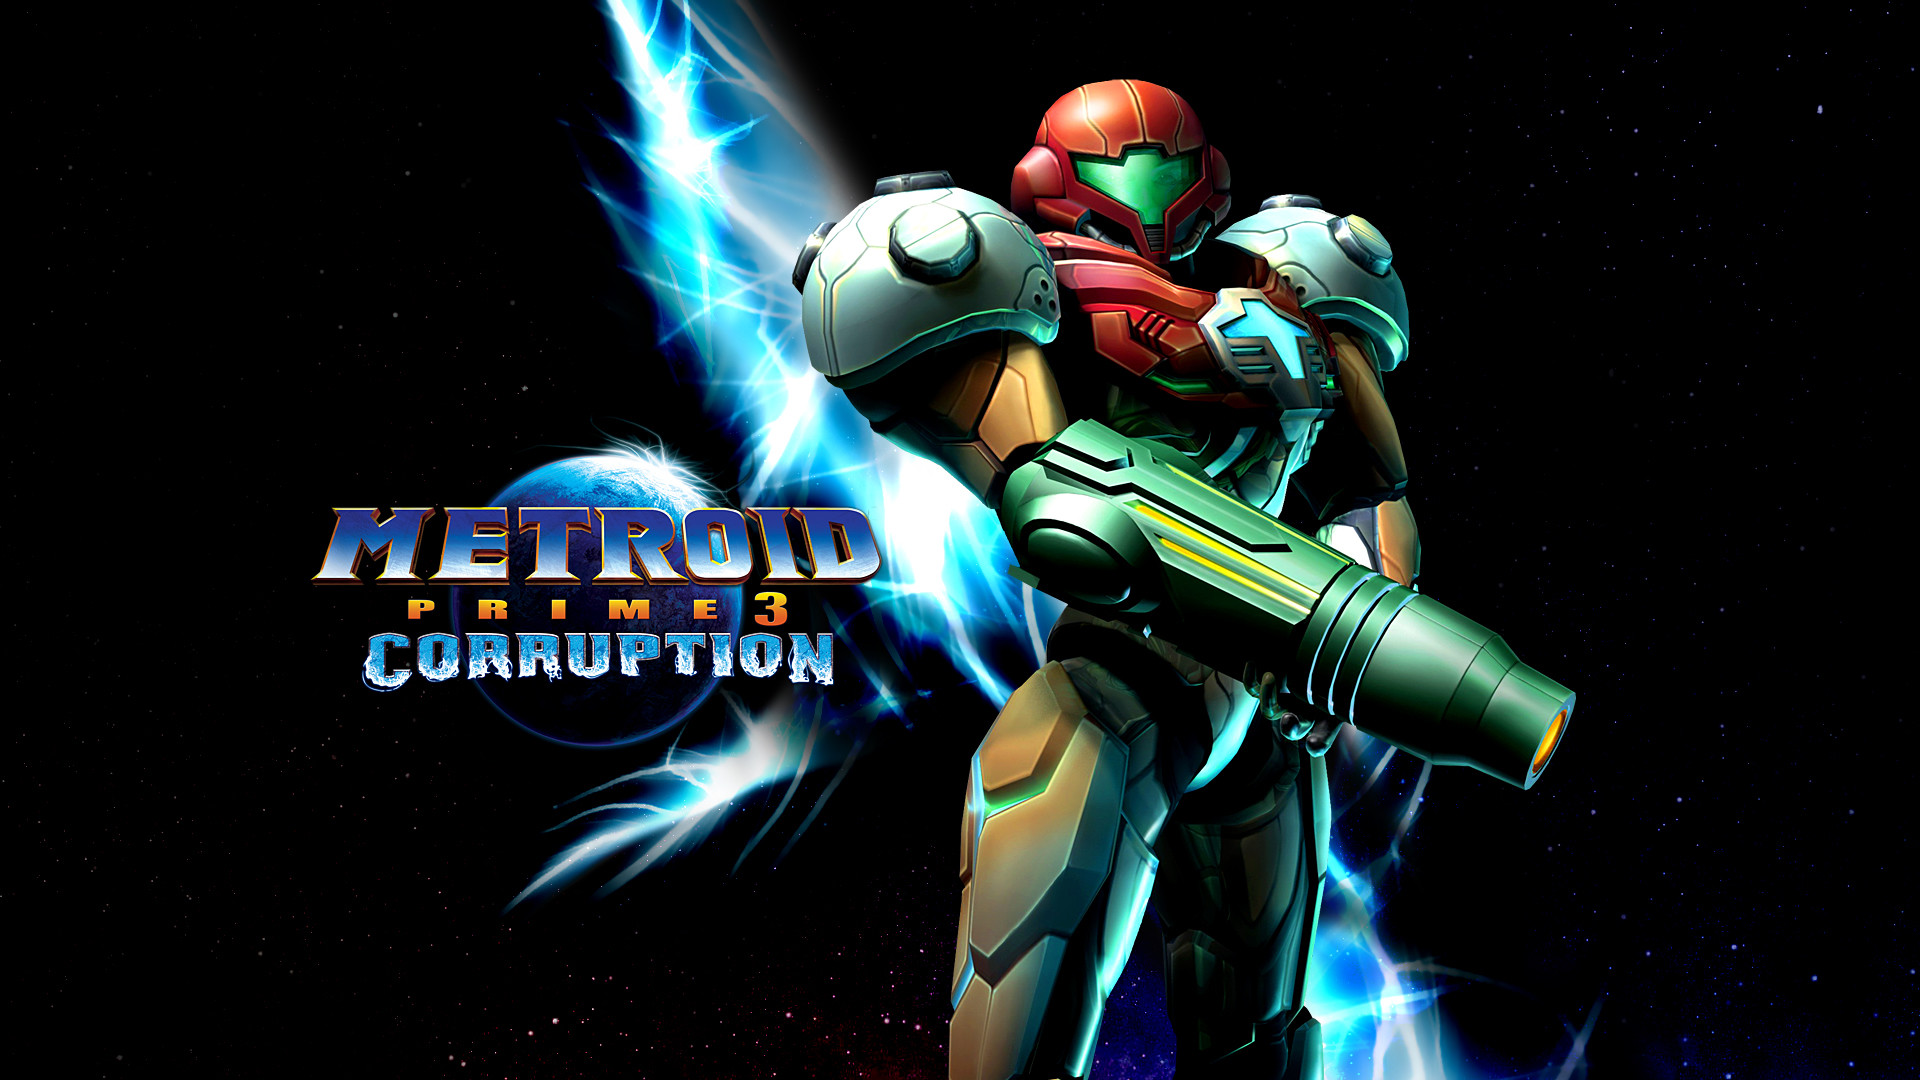 1920x1080 metroid wallpapers Metroid Prime 3: Corruption Full HD Wallpaper and  Background Image  ID: